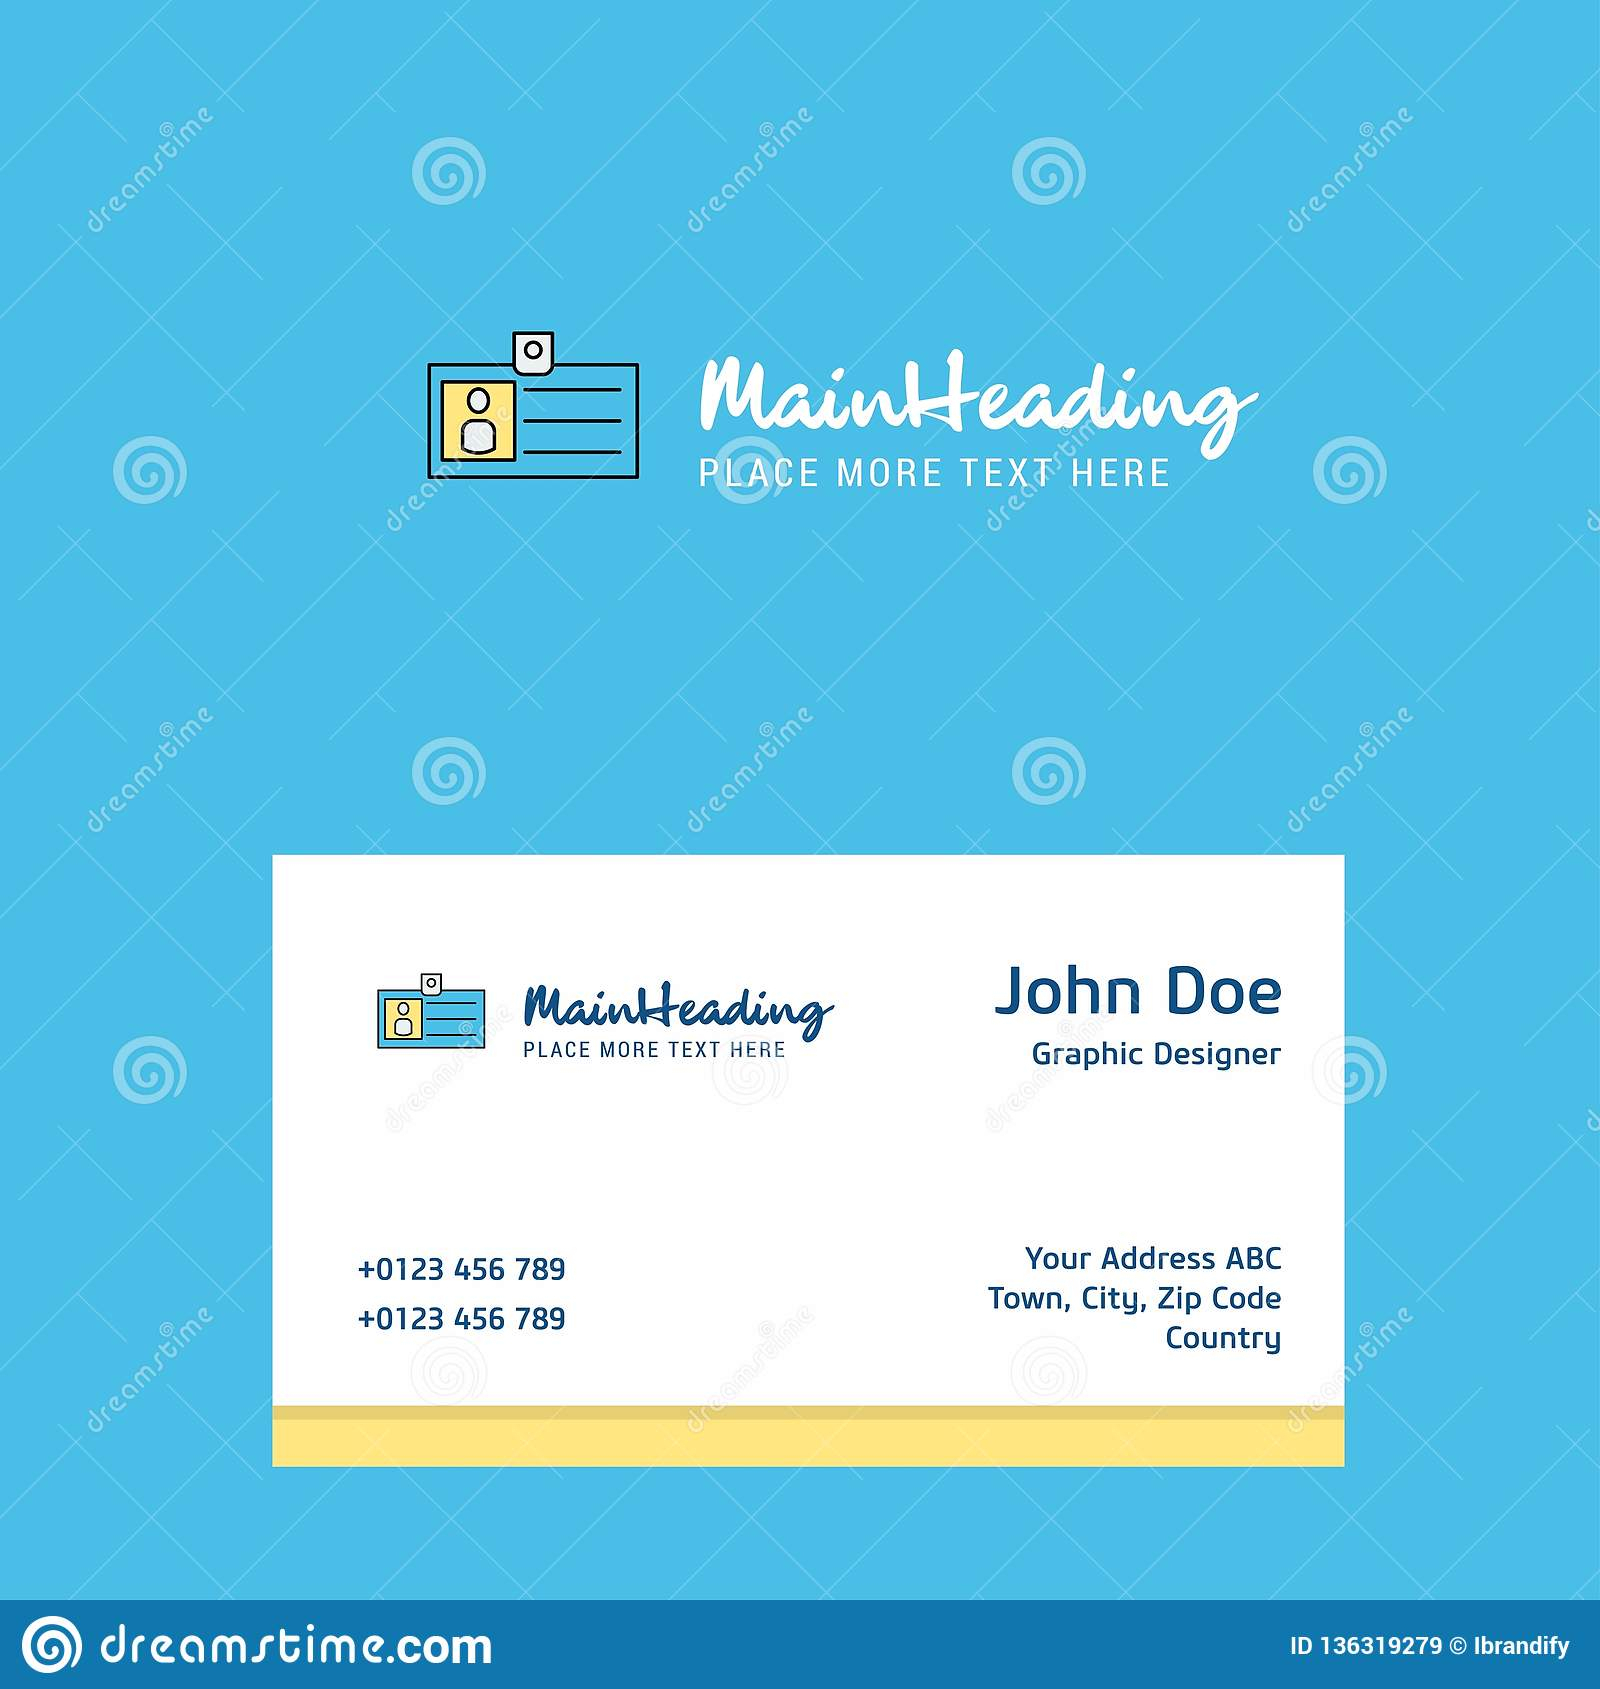 Id Card Logo Design With Business Card Template. Elegant Intended For Media Id Card Templates